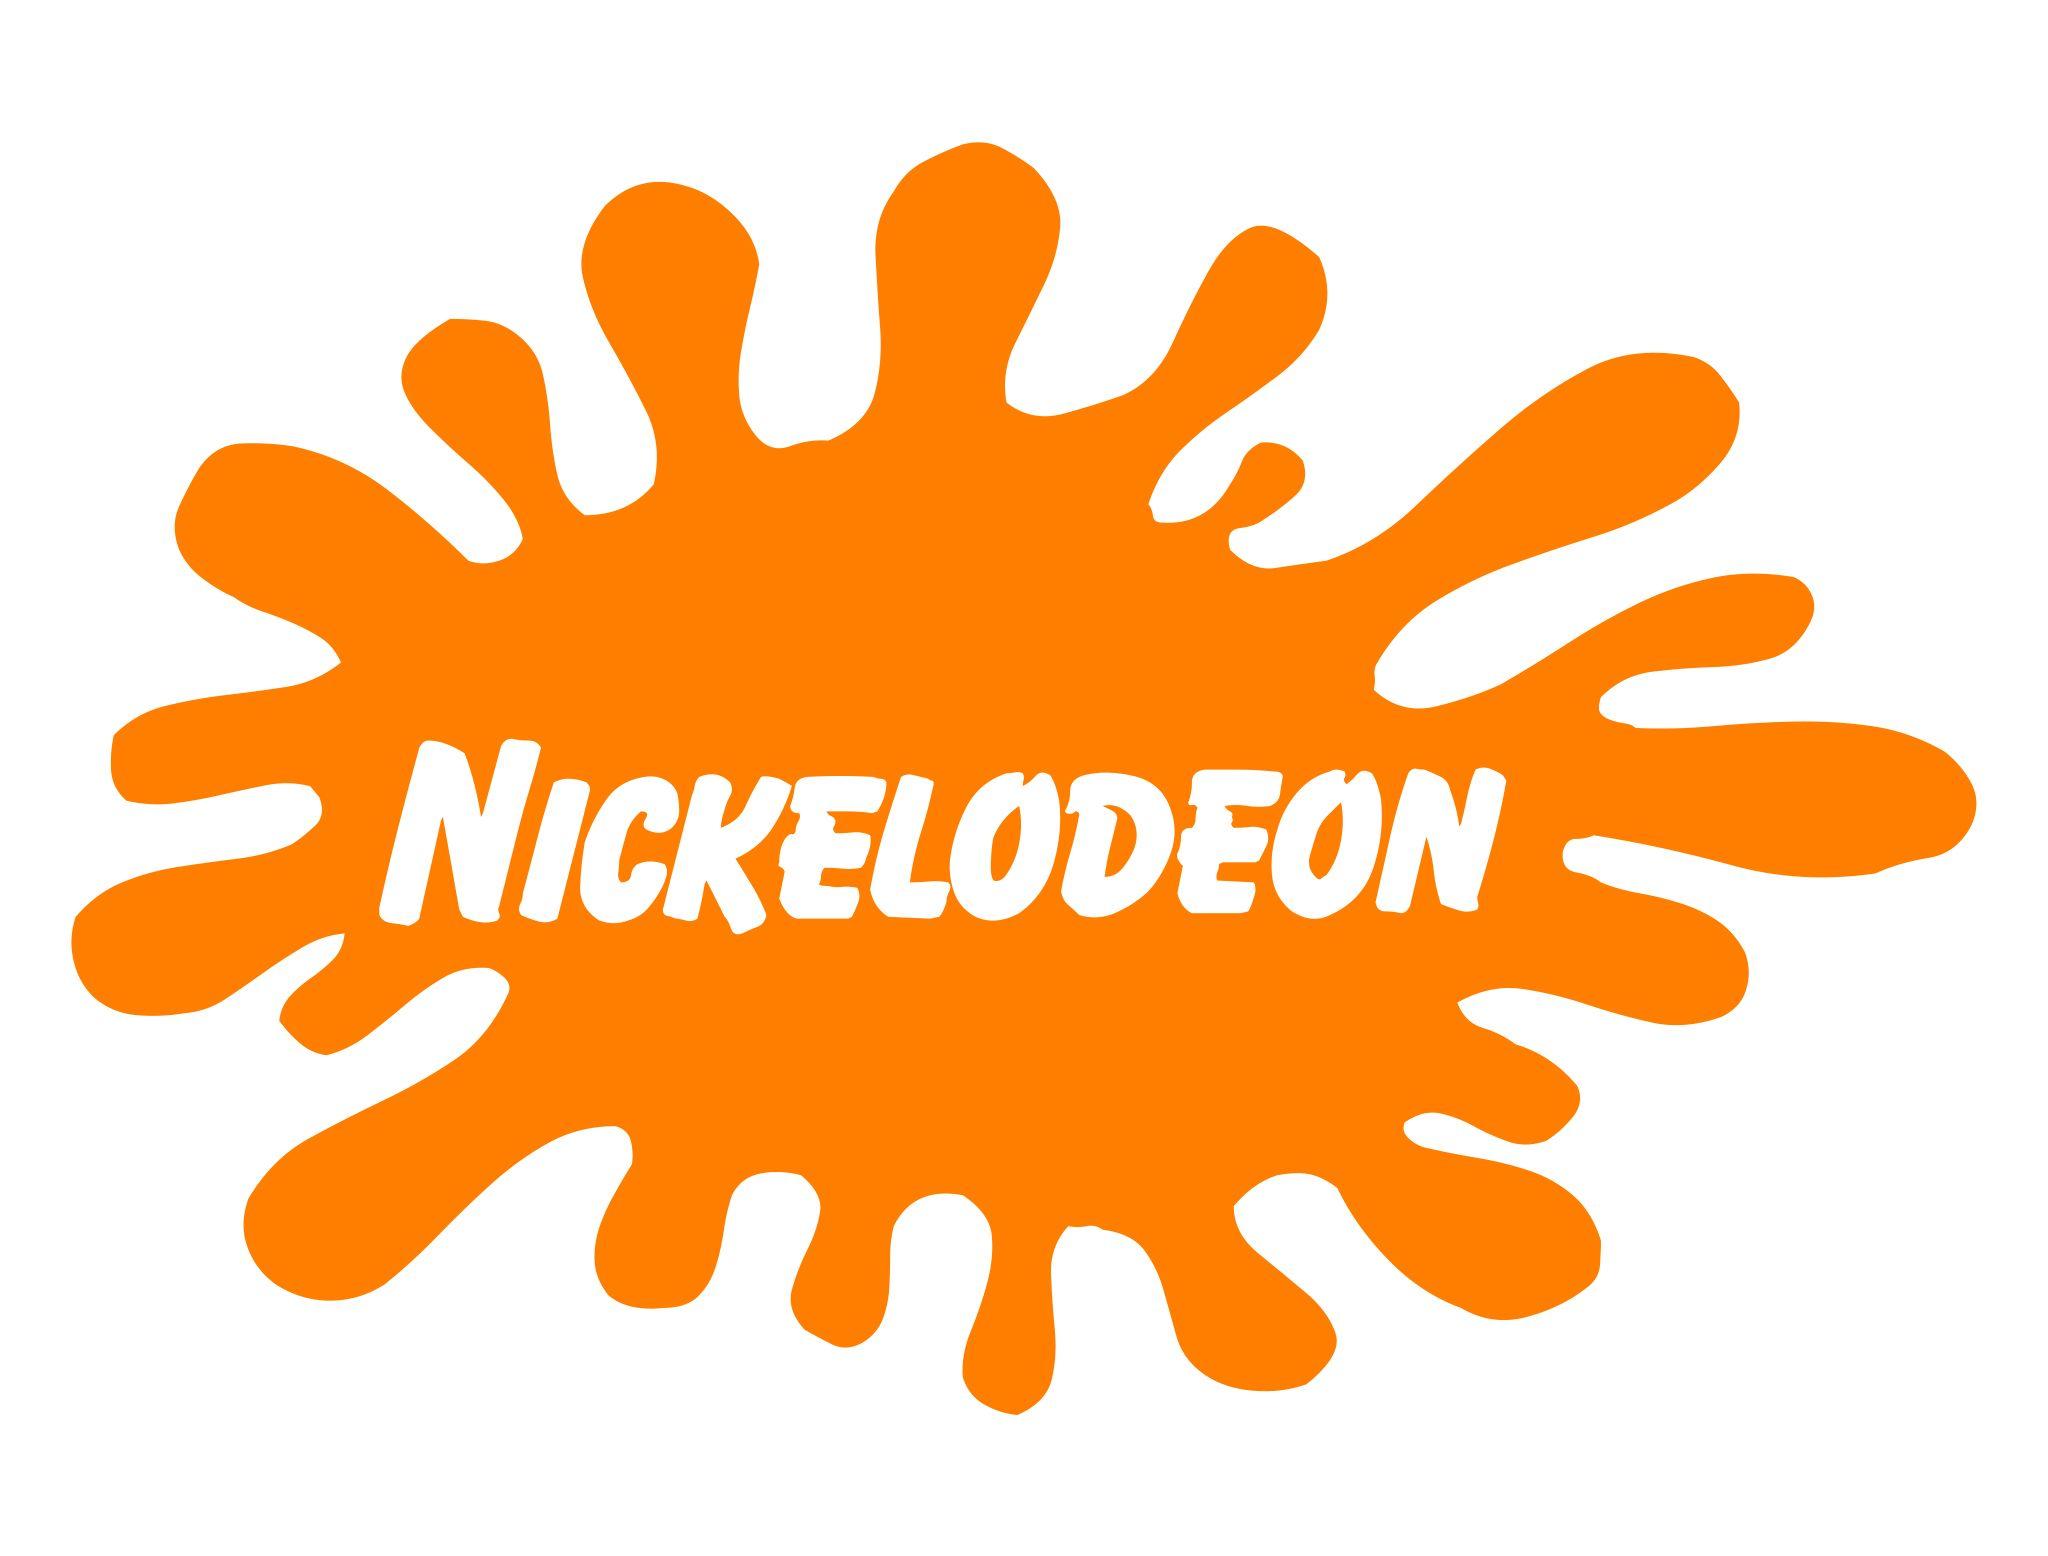 New Nickelodeon Logo - Nickelodeon Logo, Nickelodeon Symbol Meaning, History and Evolution